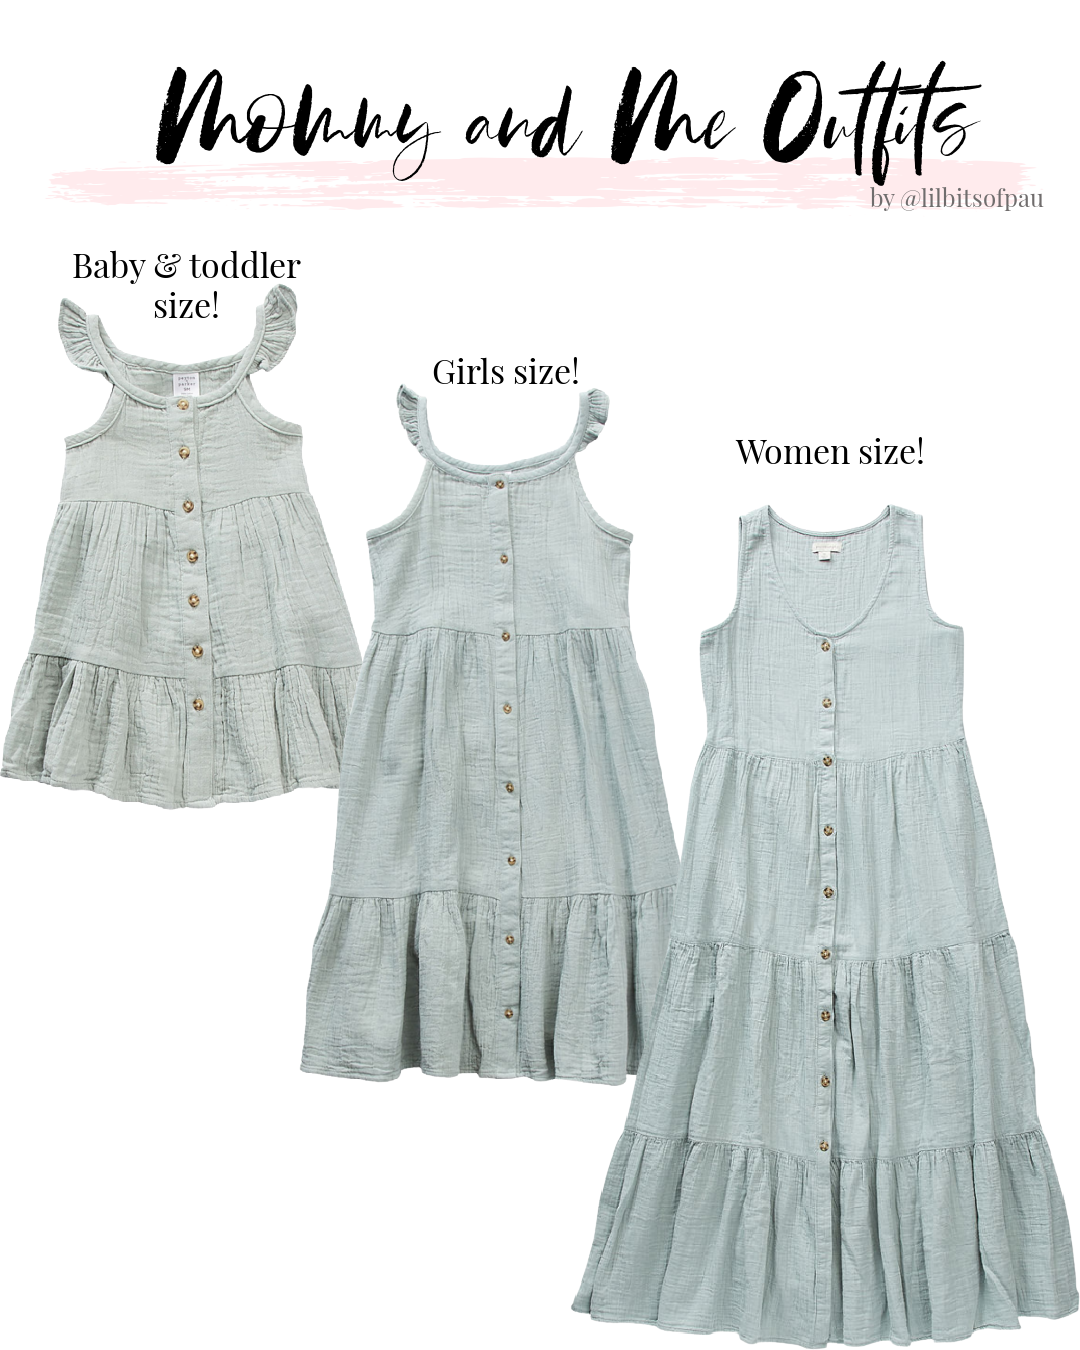 Mommy and me outfit ideas, Mommy and Daughter Matching Outfits